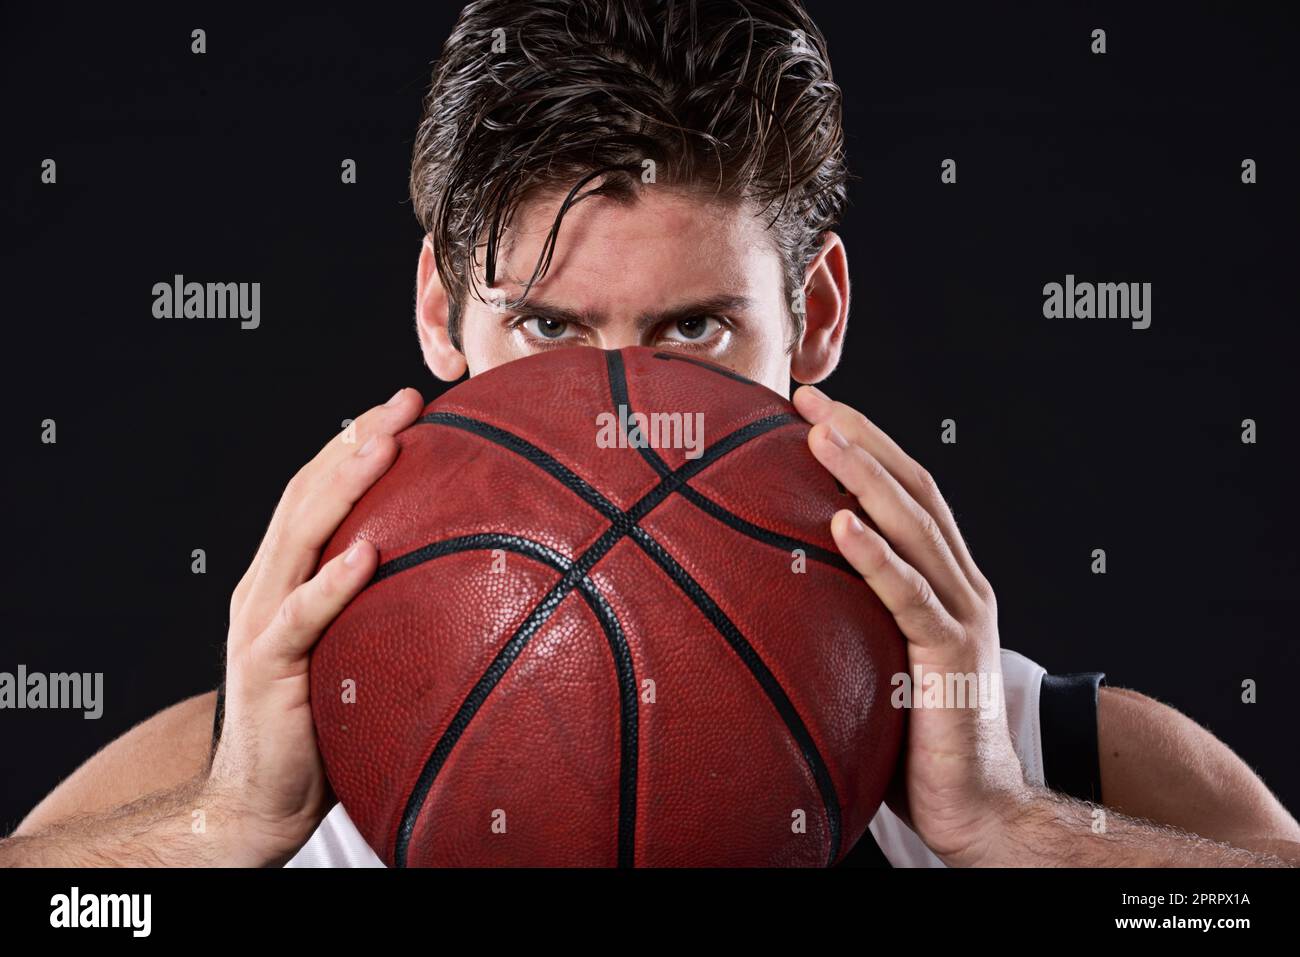 Time to play ball. Cropped studio portrait of a determined basketball player holding the ball out in front of him. Stock Photo